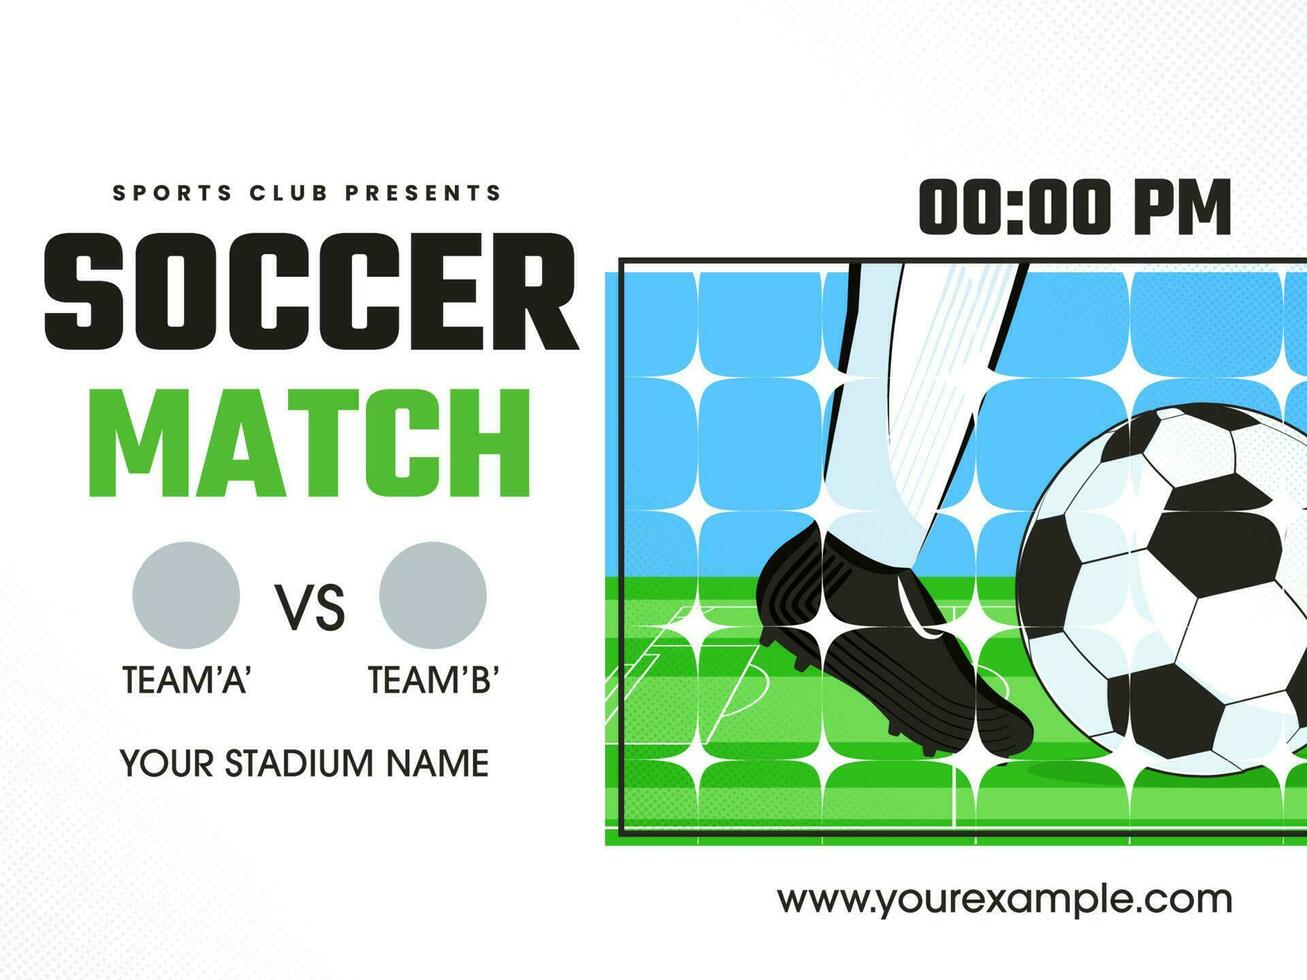 Football Competition Flyer or Poster Template with Closeup of a Player Action with Soccer, and Match Day Details. Flat Style Vector Illustrations.